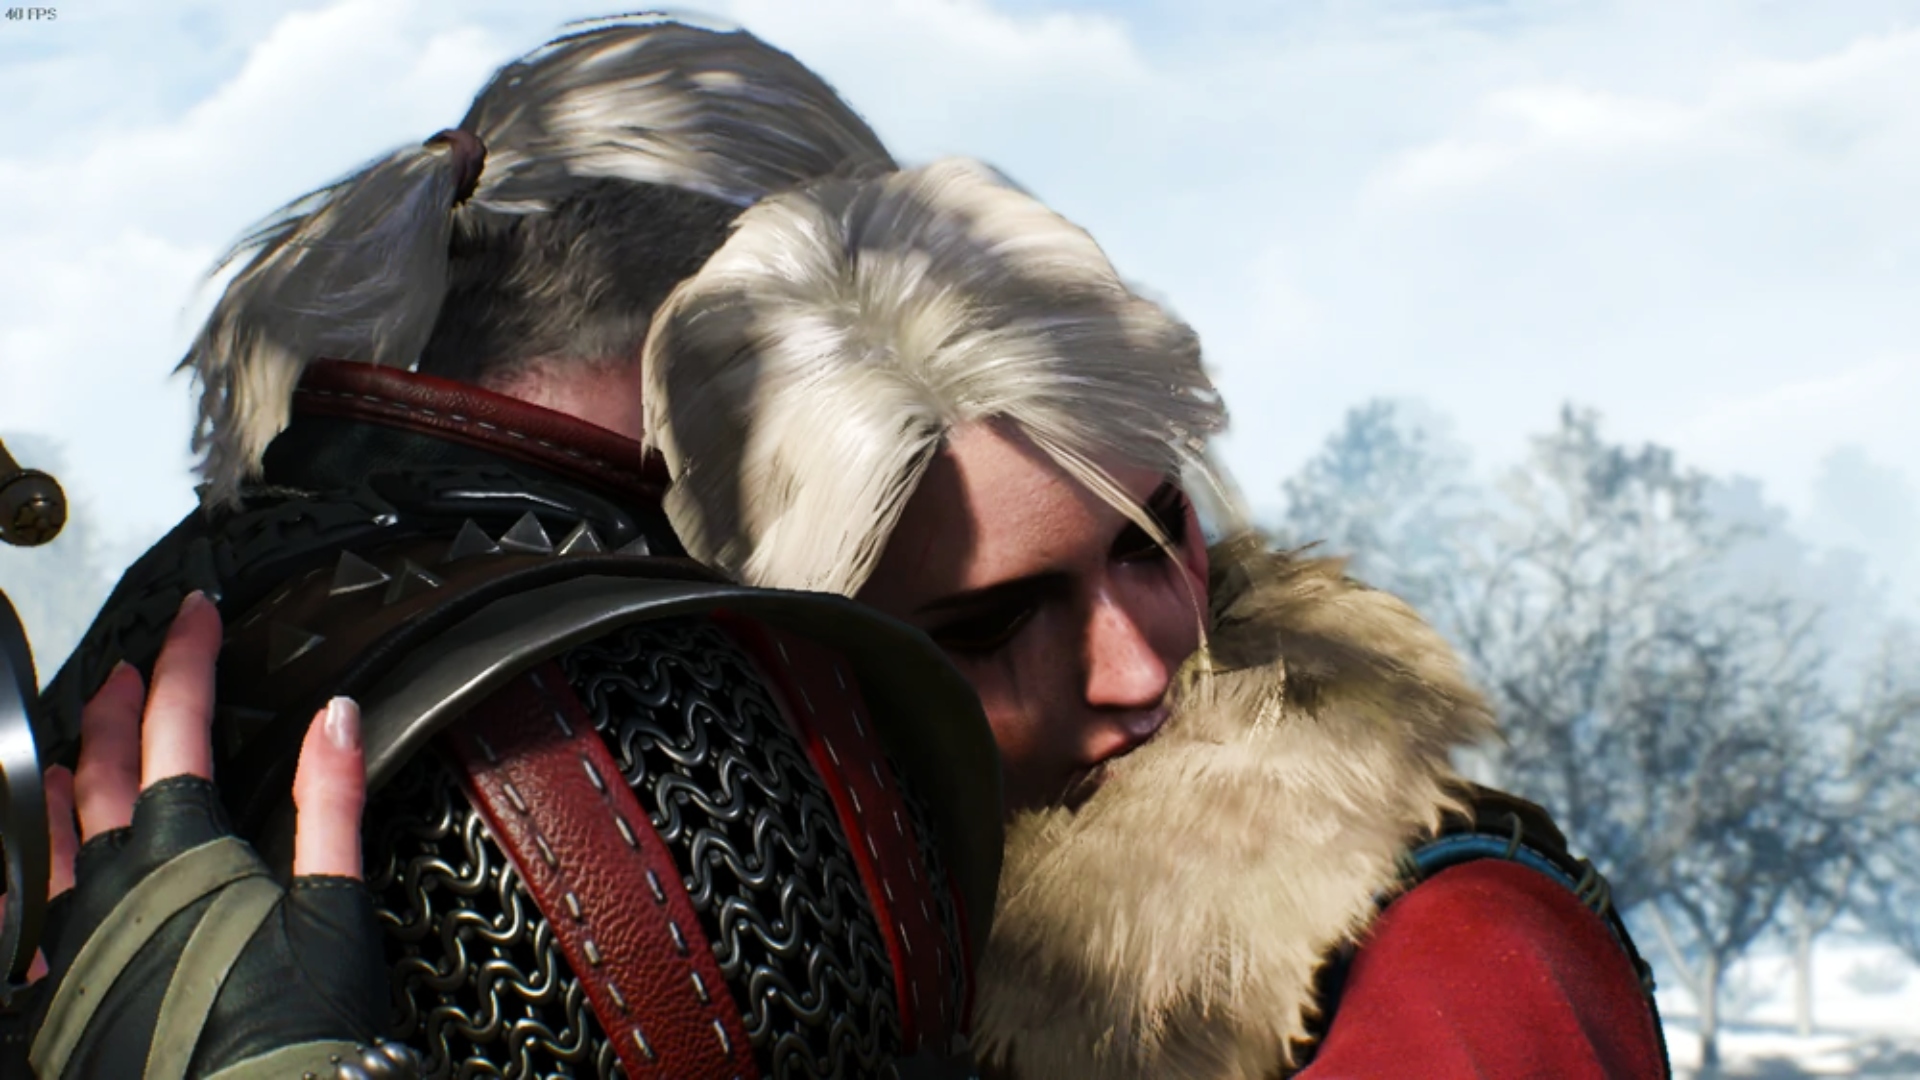 The Witcher 3: how to get the best ending